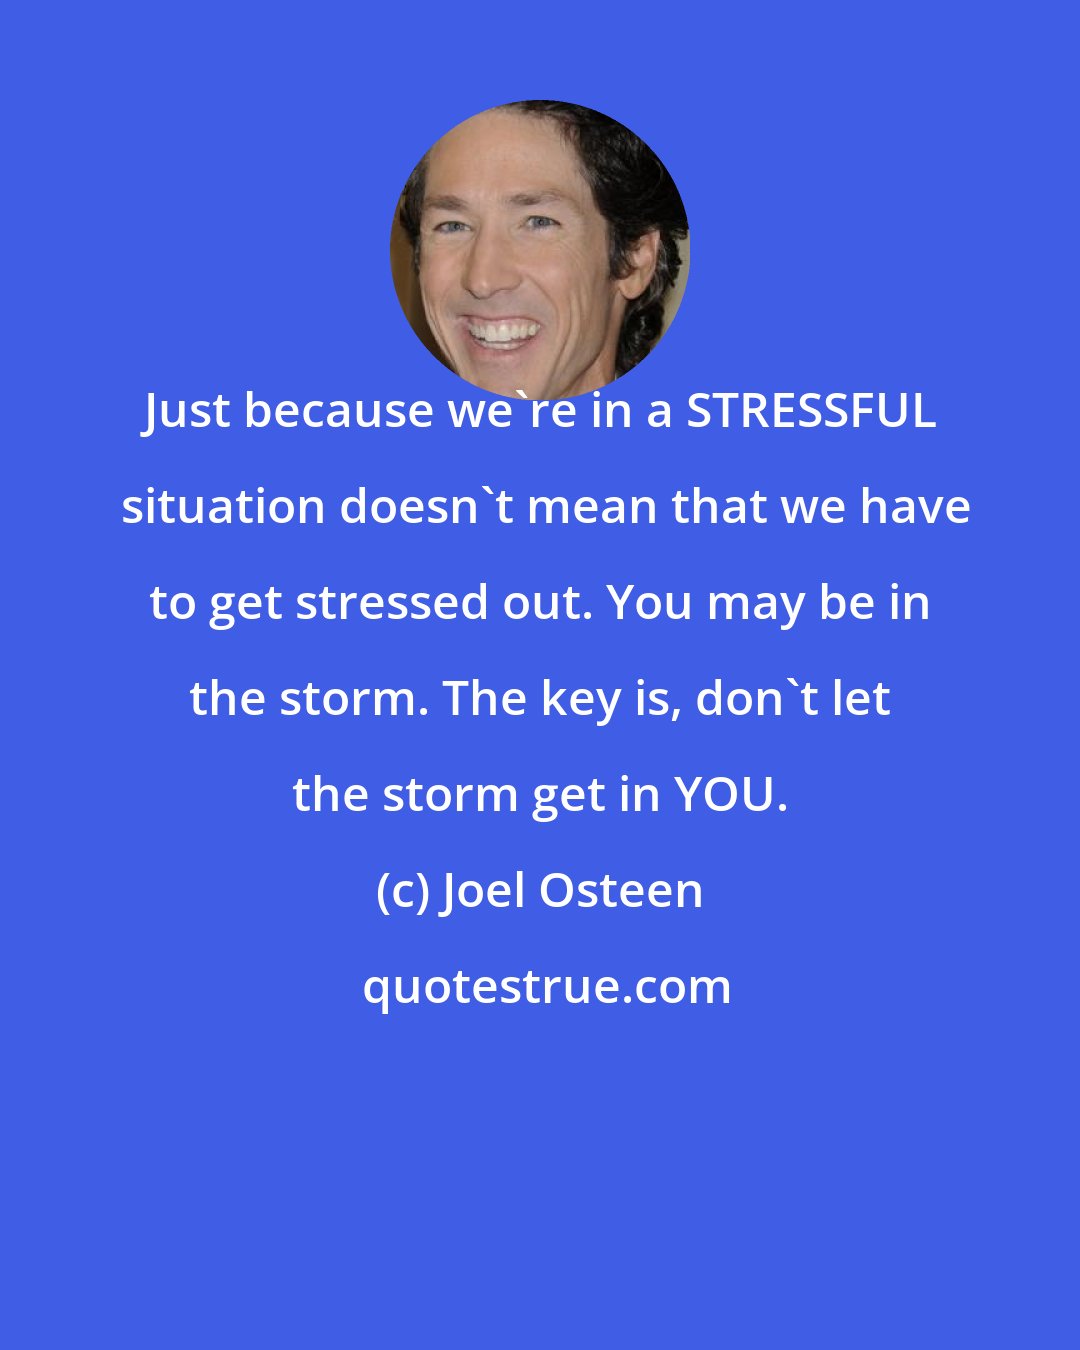 Joel Osteen: Just because we're in a STRESSFUL  situation doesn't mean that we have to get stressed out. You may be in the storm. The key is, don't let the storm get in YOU.